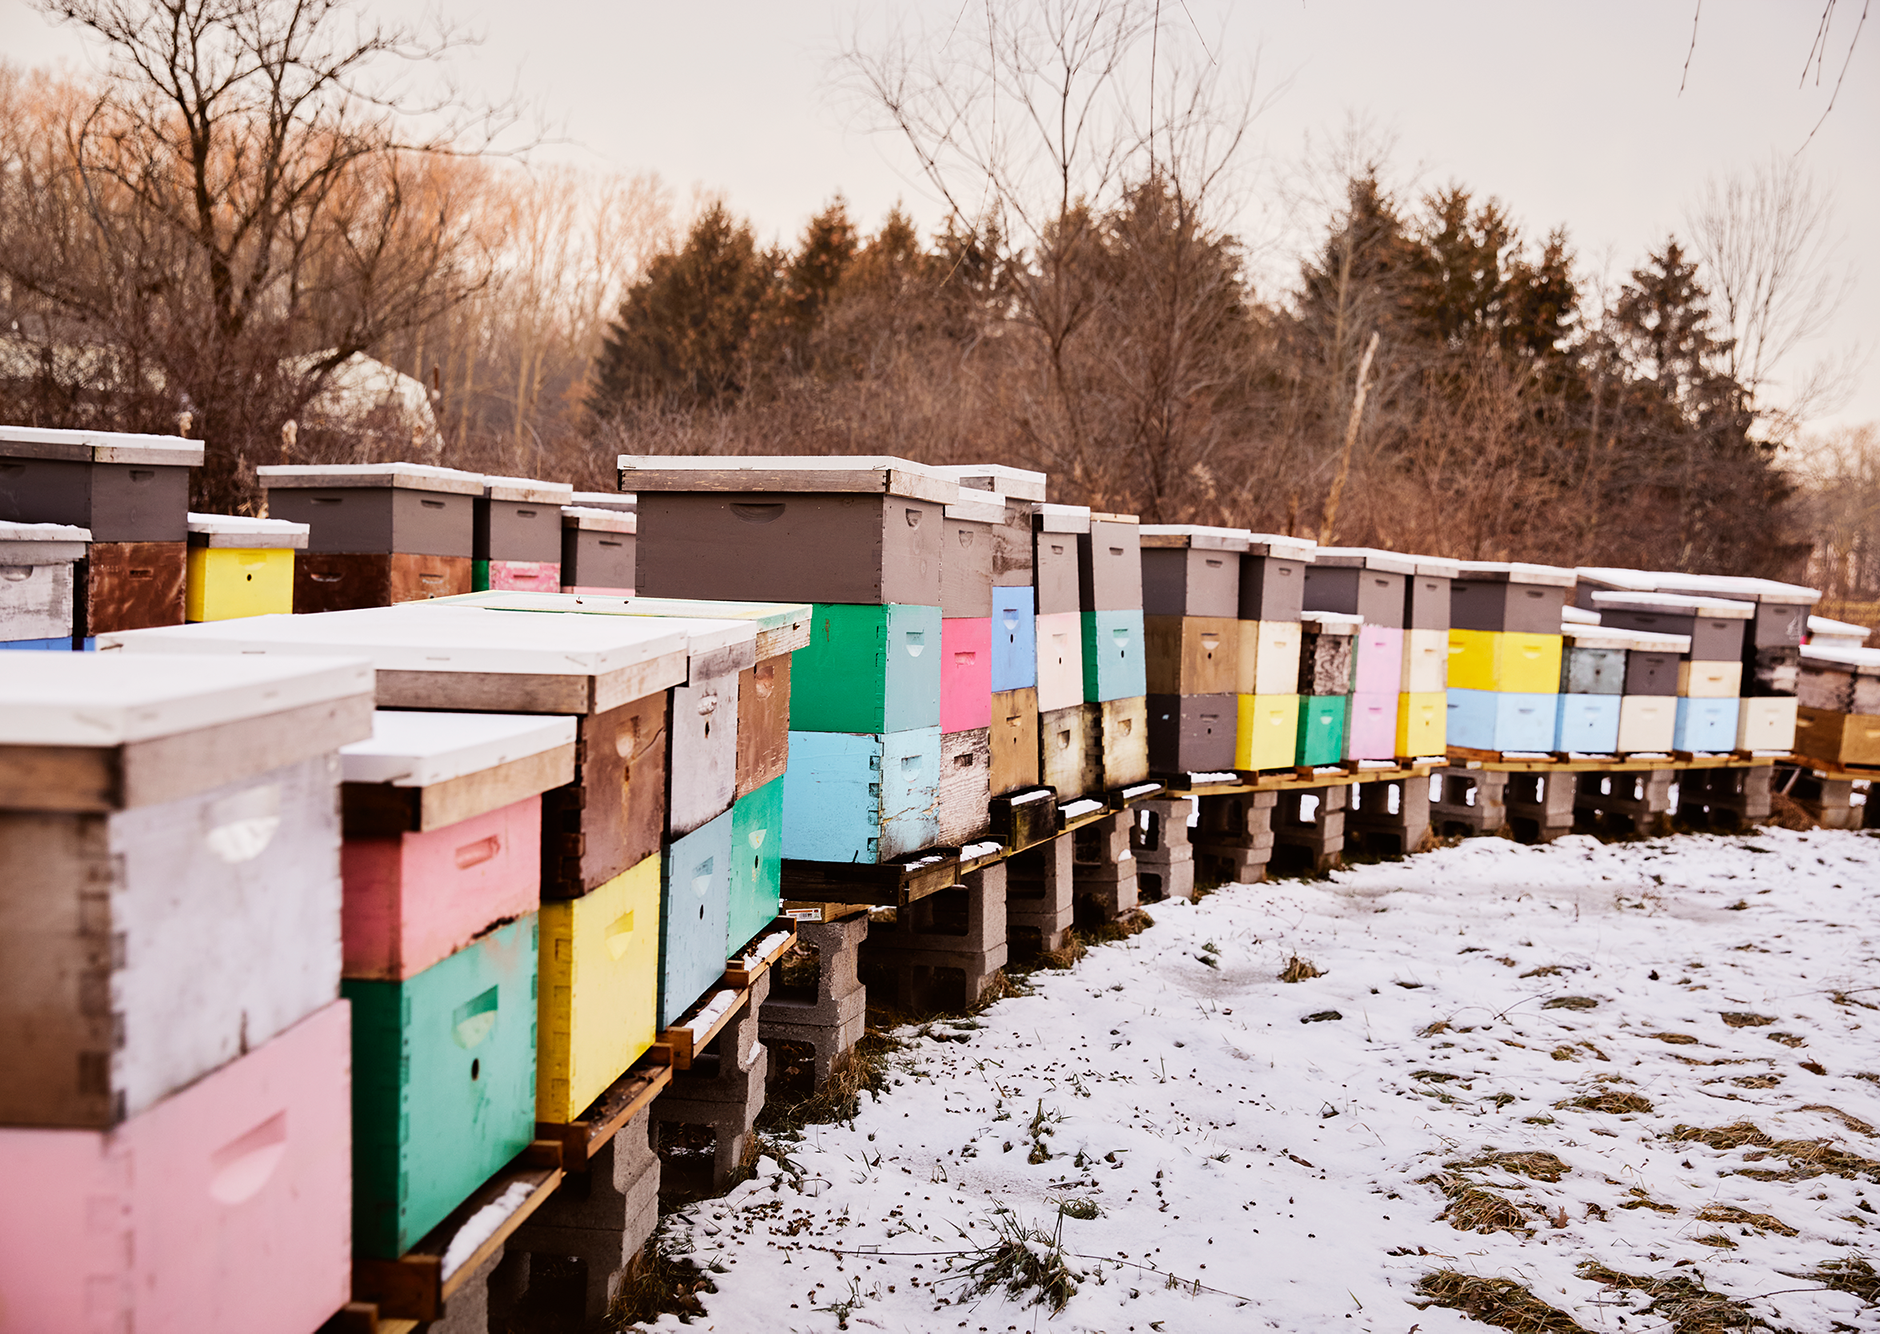 beekeeper boxes in the winter